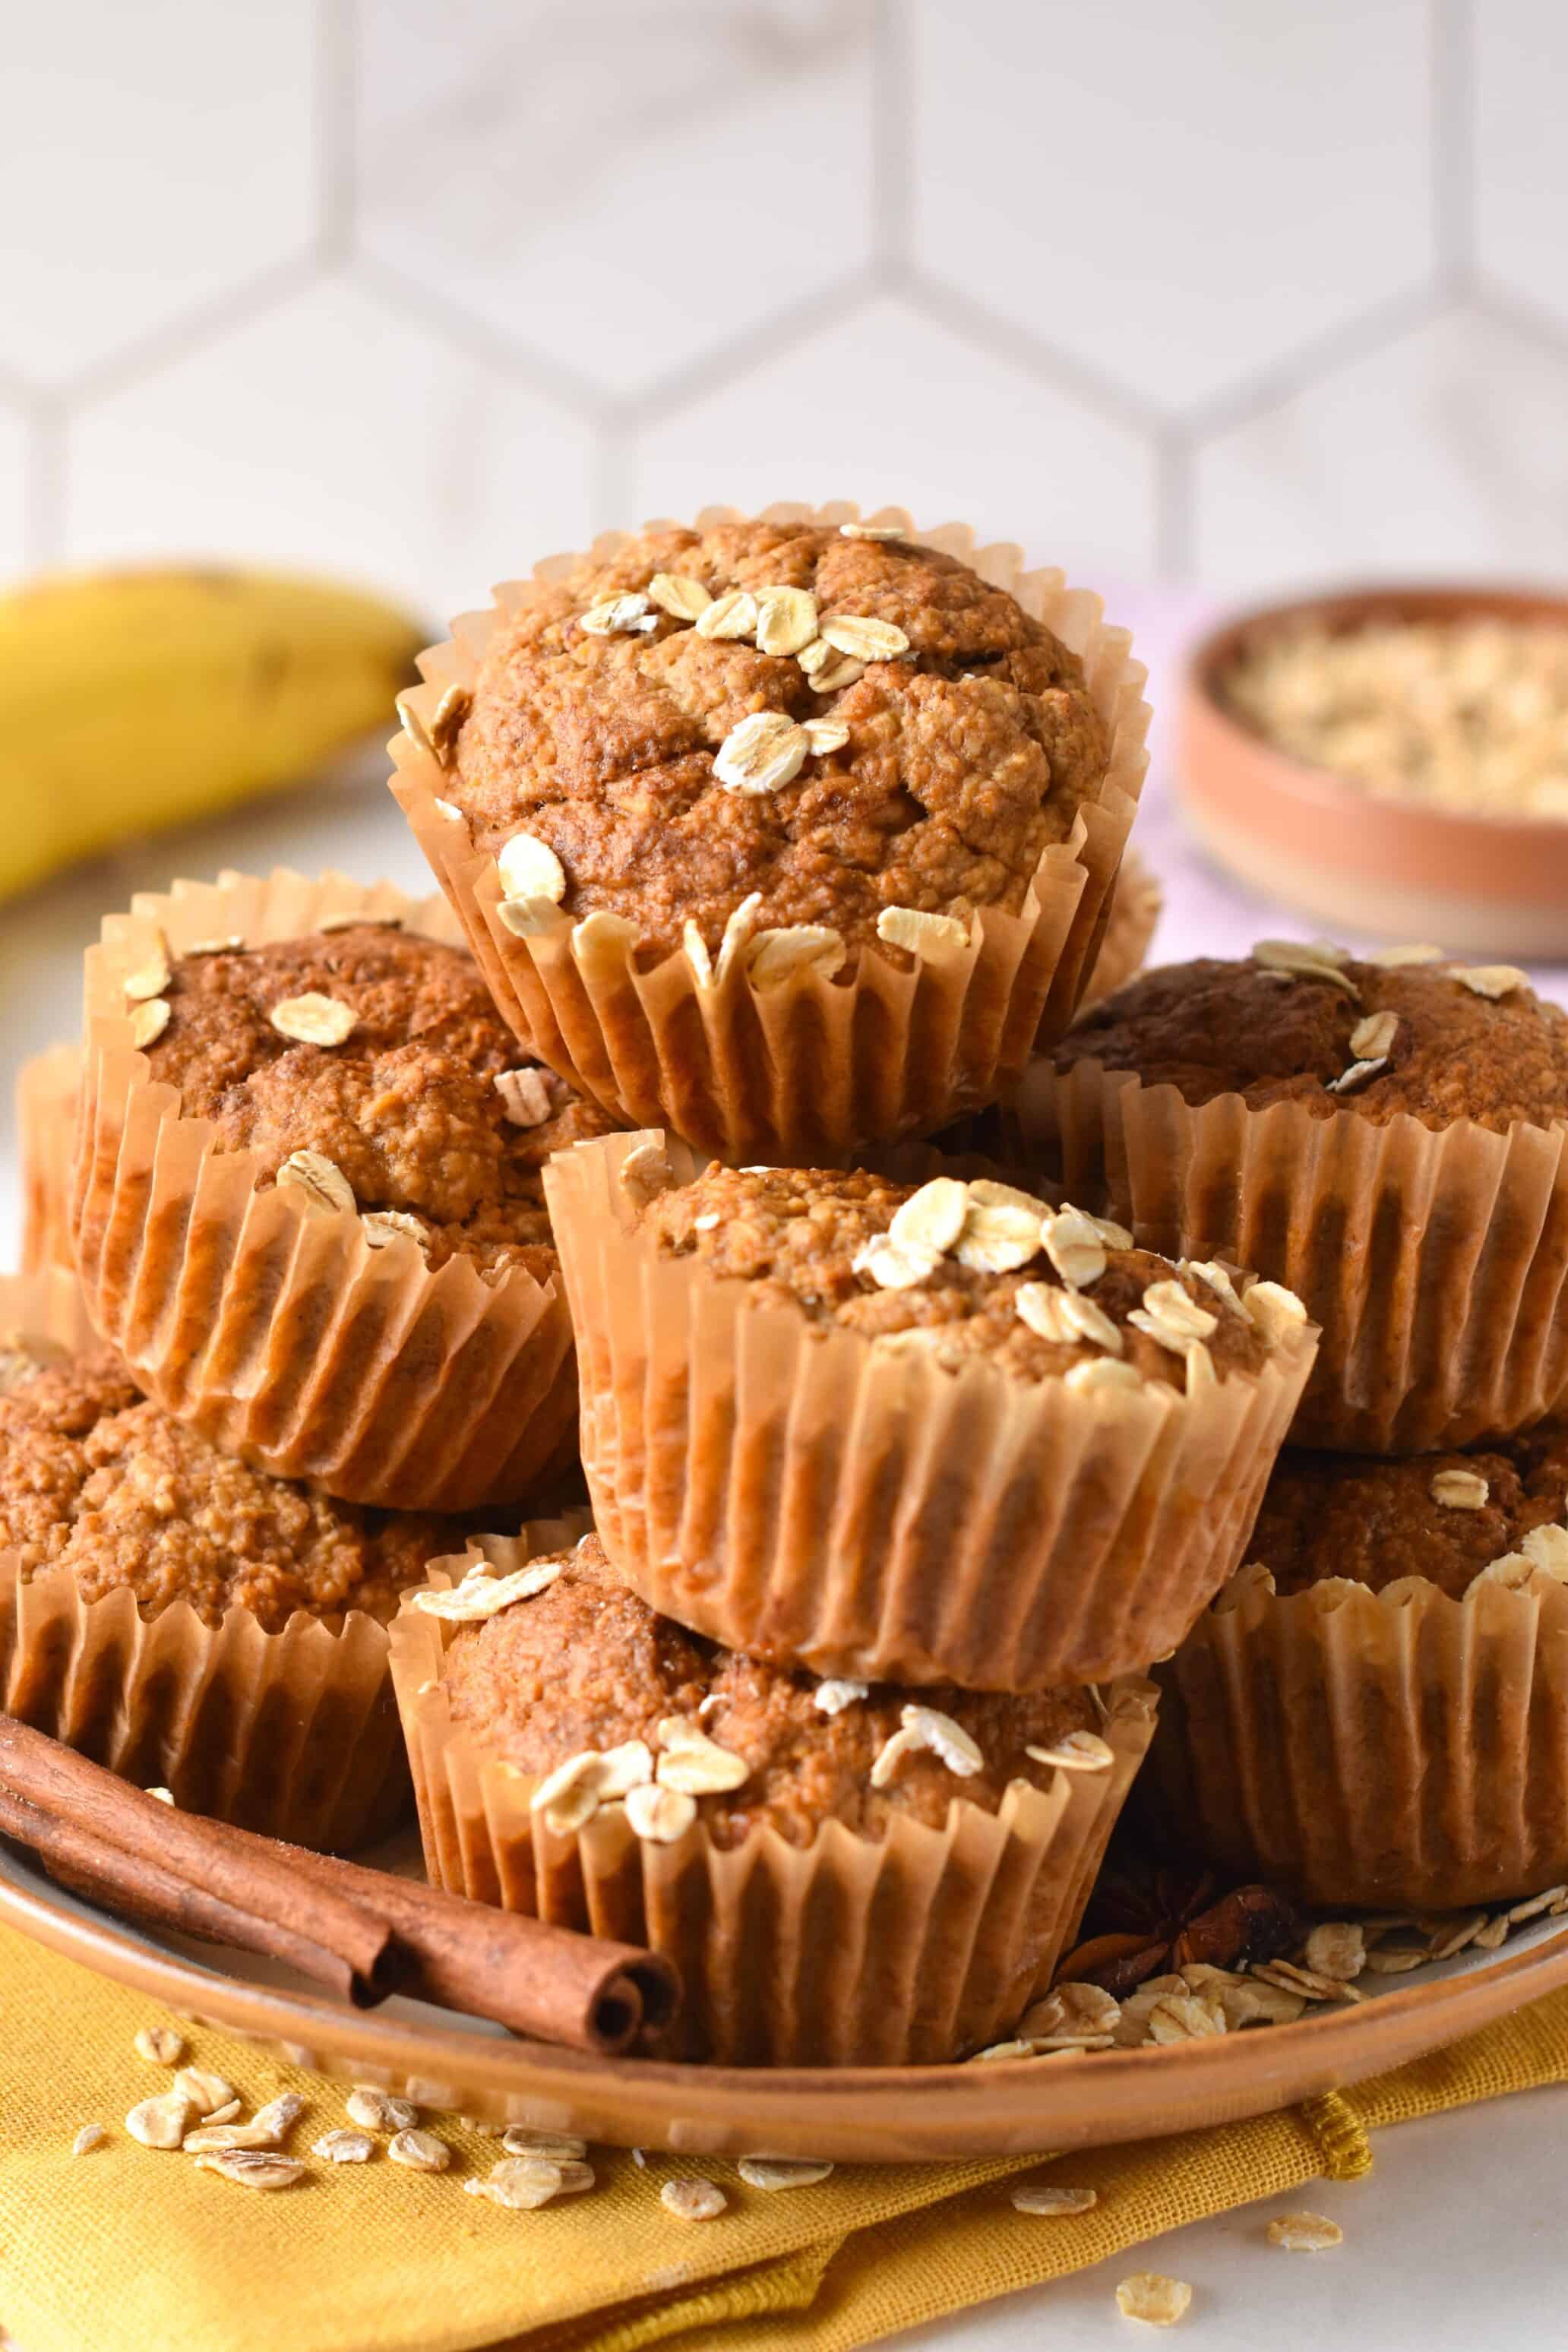 These Oat Flour Banana Muffins are healthy banana muffins made from oat flour. They are refined sugar-free, made with no eggs, no dairy, and the perfect healthy breakfast muffins.